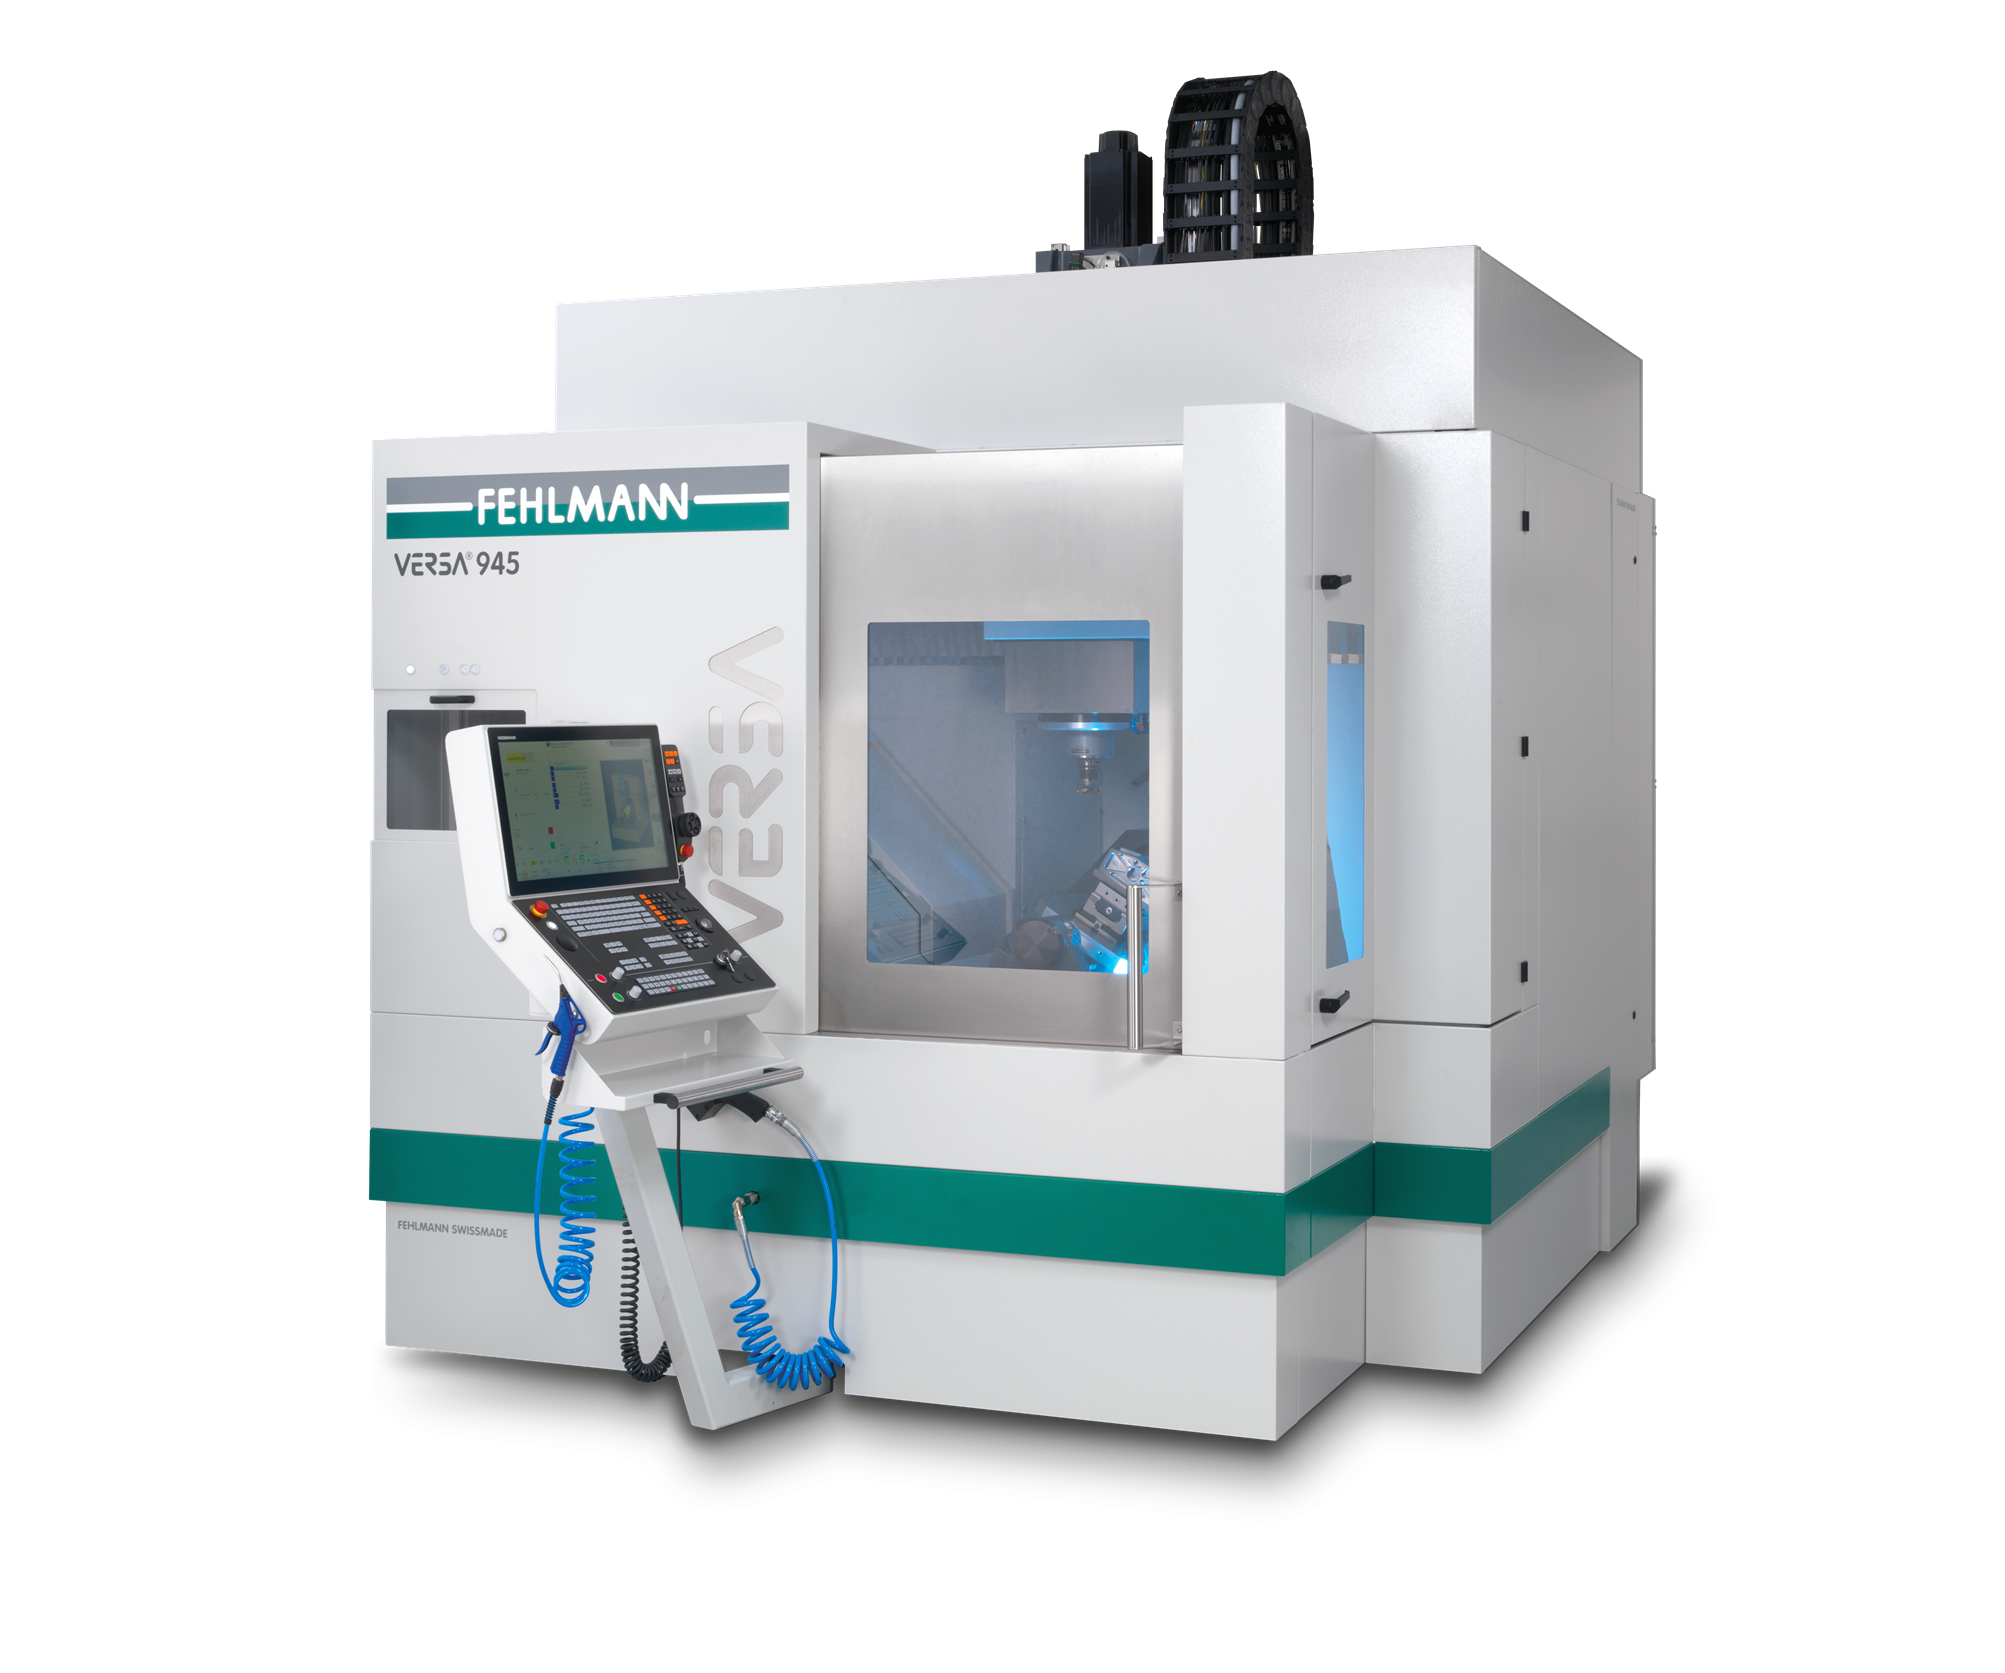 High performance machining center in portal design VERSA 945, for highly precise and dynamic 5-axis machining of workpieces with a swing circle of up to Ø 650 mm 